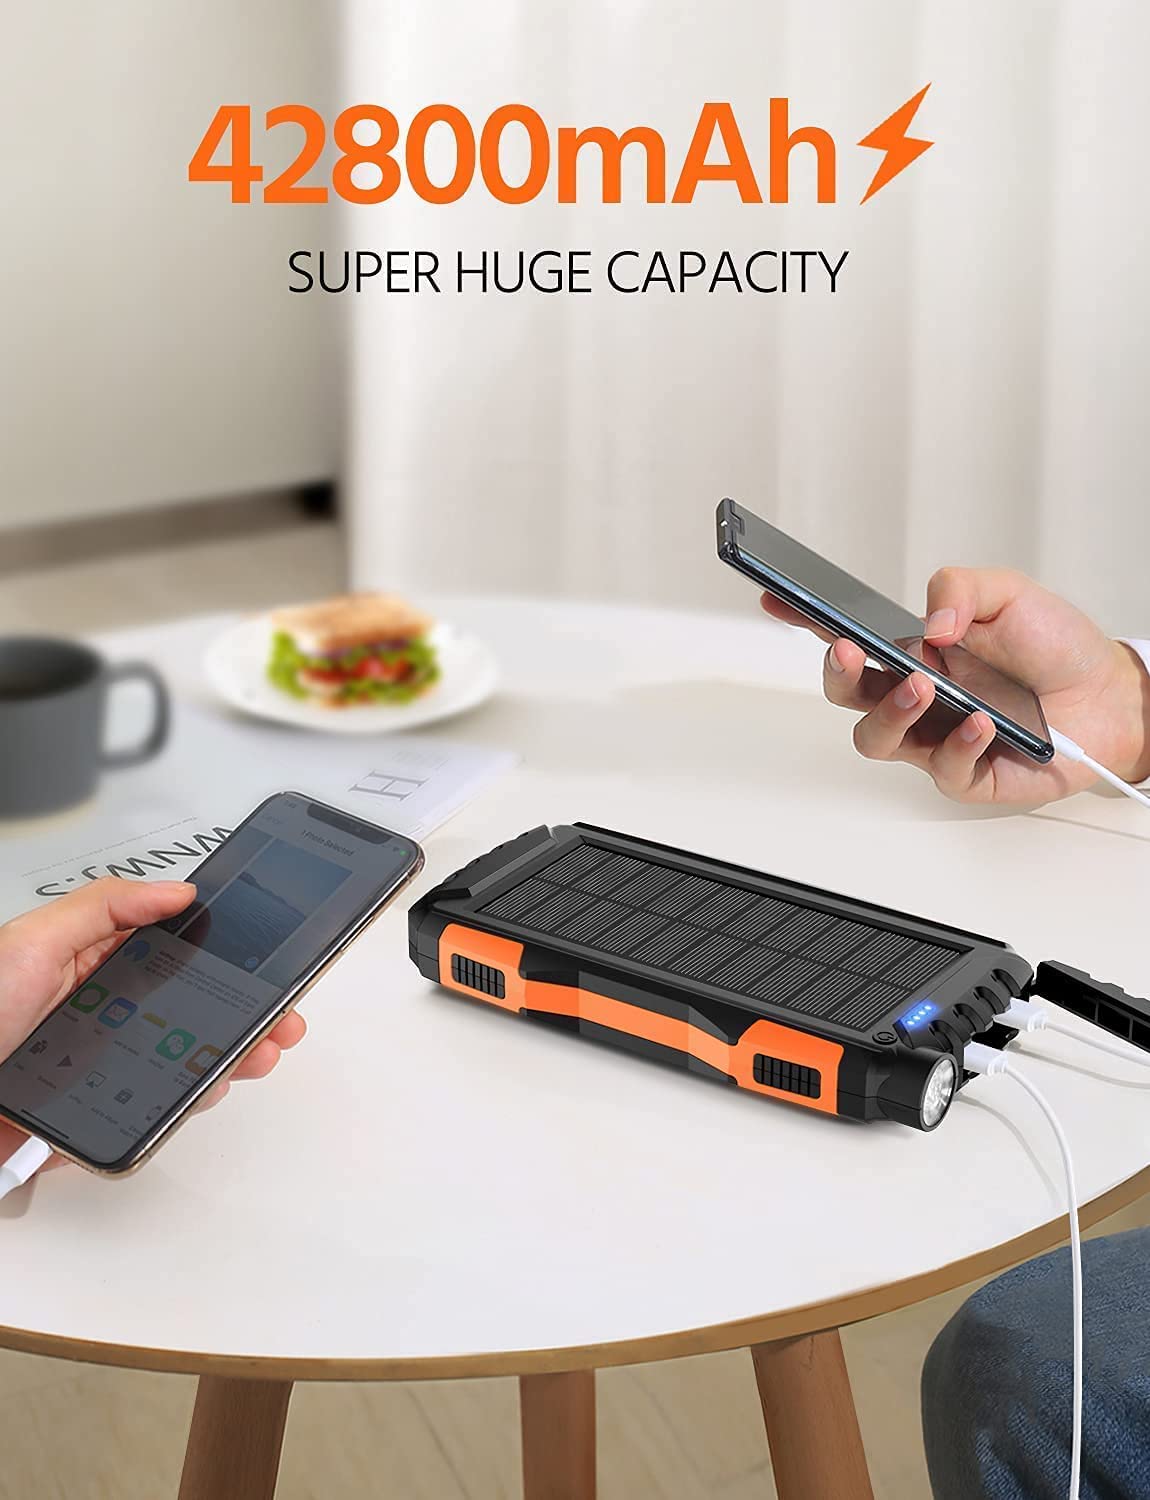 Solar Charger, Power Bank, 42800mAh Portable Charger Power Bank External Battery Pack 5V3.1A Qc 3.0 Fast Charger Built-in Super Bright Flashlight (Deep Orange)